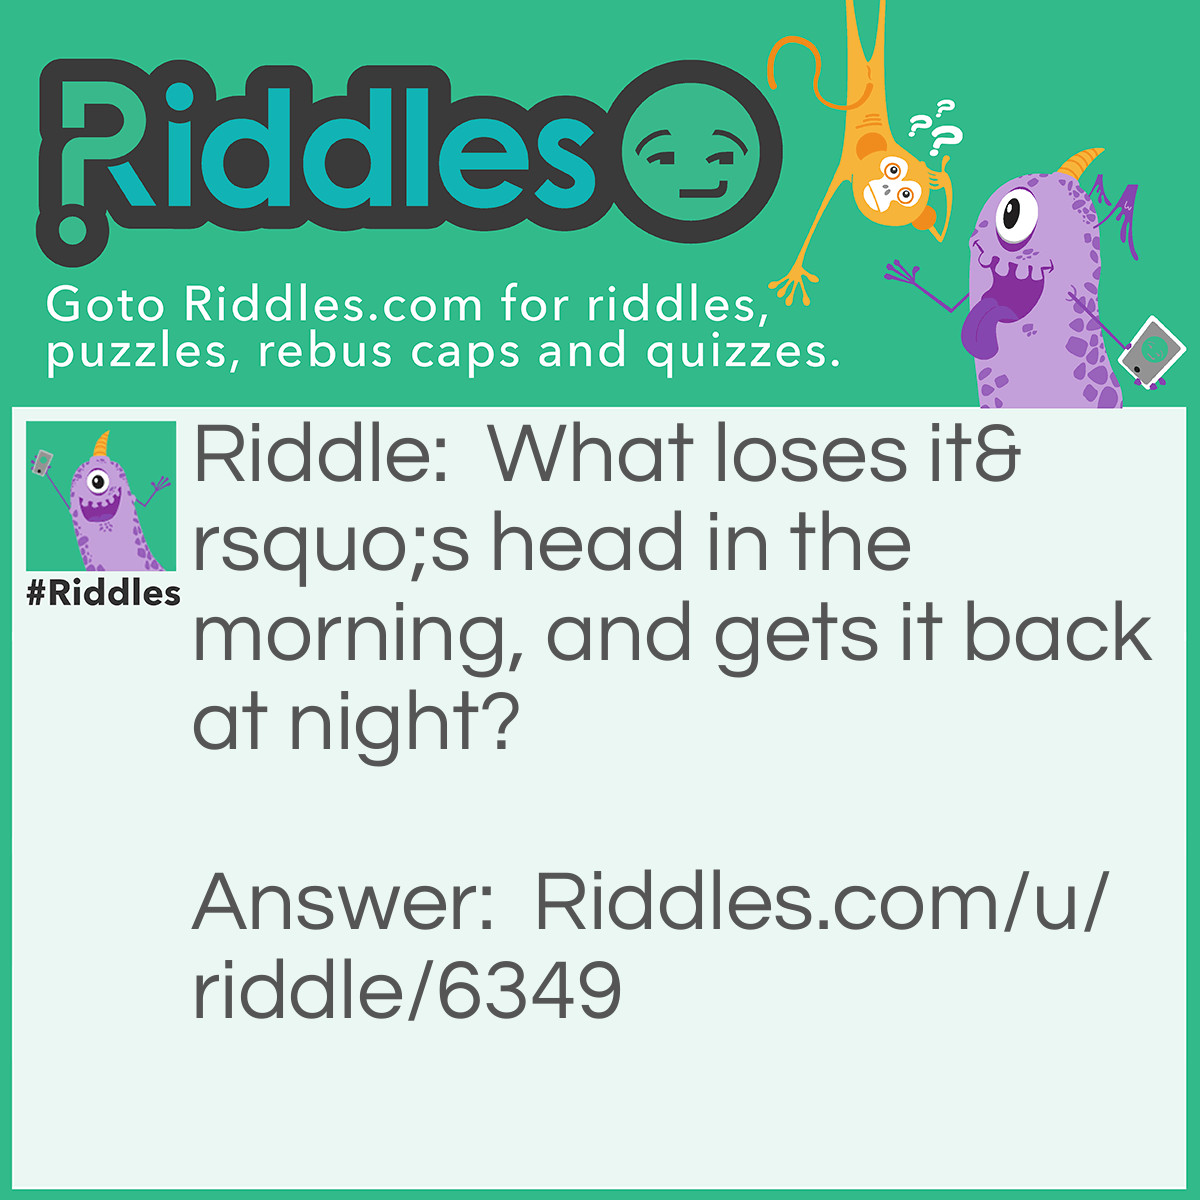 Riddle: What loses it's head in the morning, and gets it back at night? Answer: The answer is the title, can’t you see?